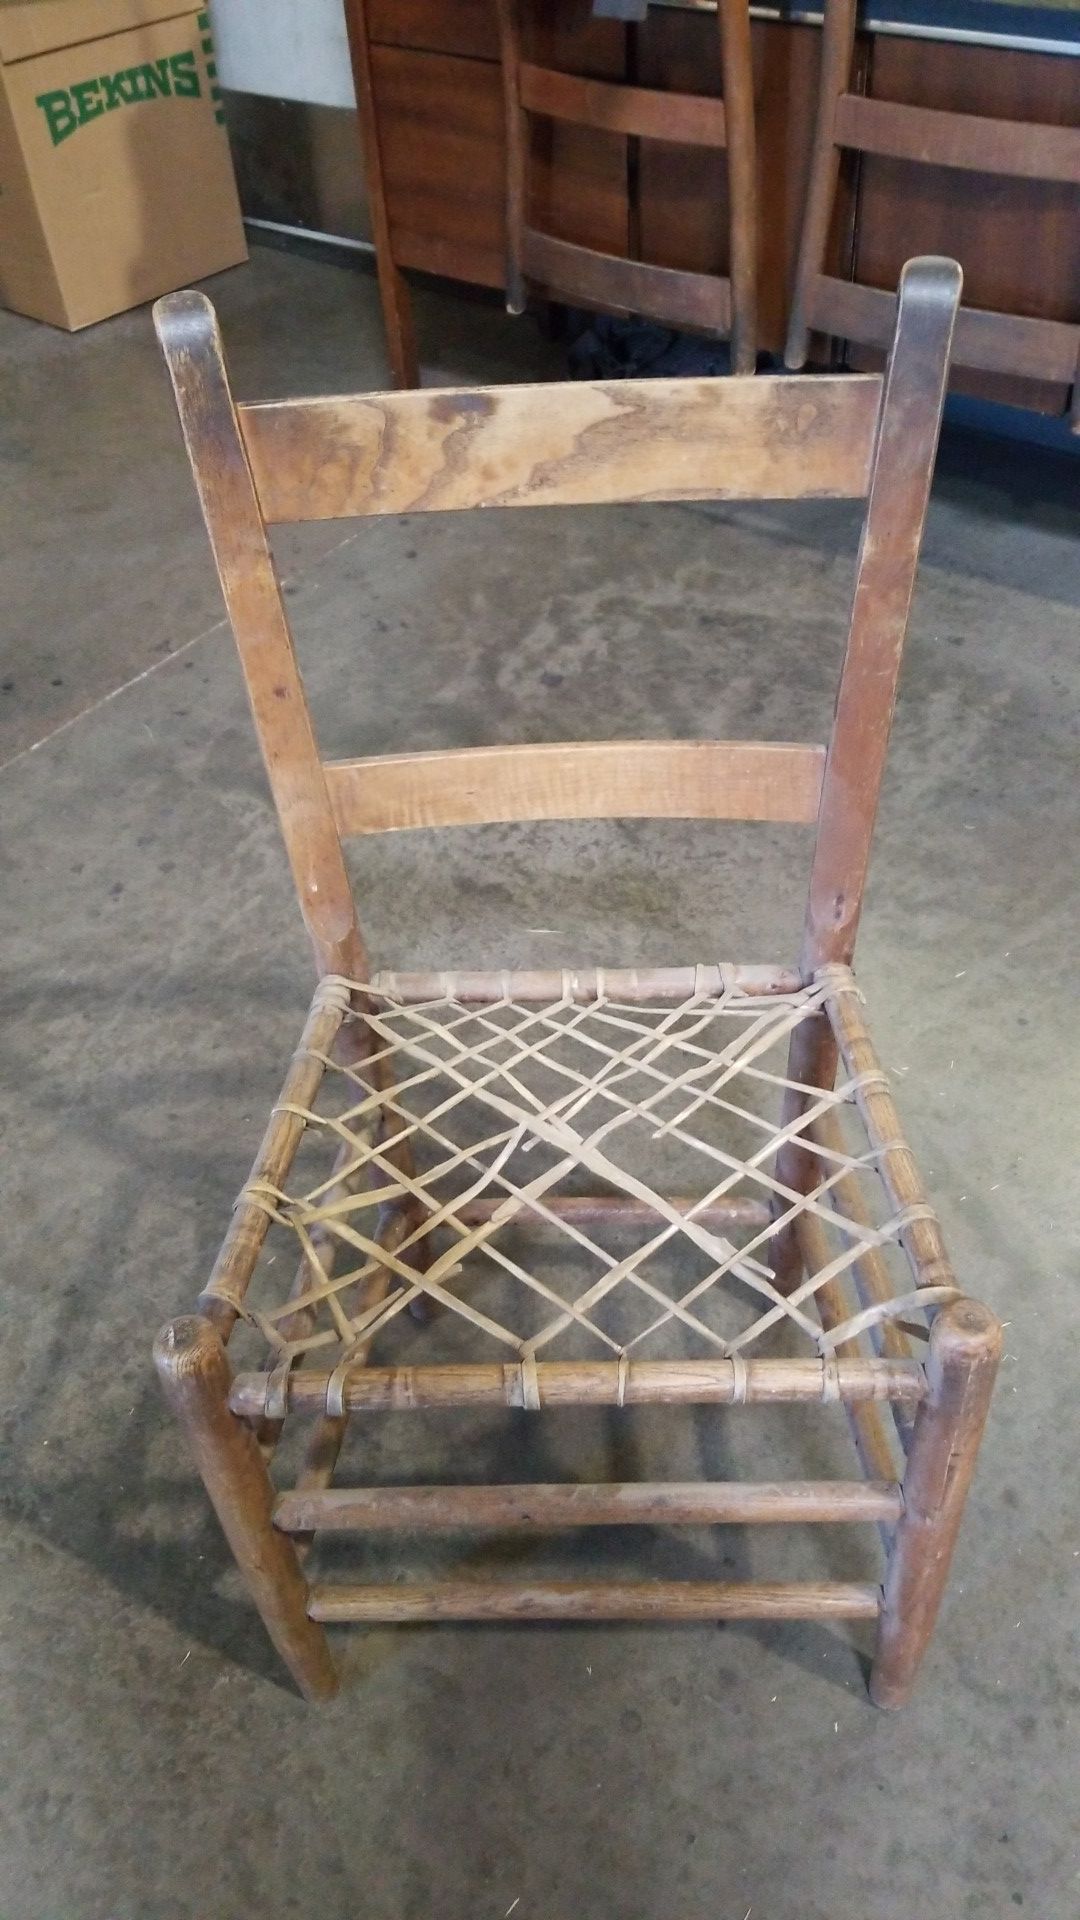 3. Old antique chairs. For decoration